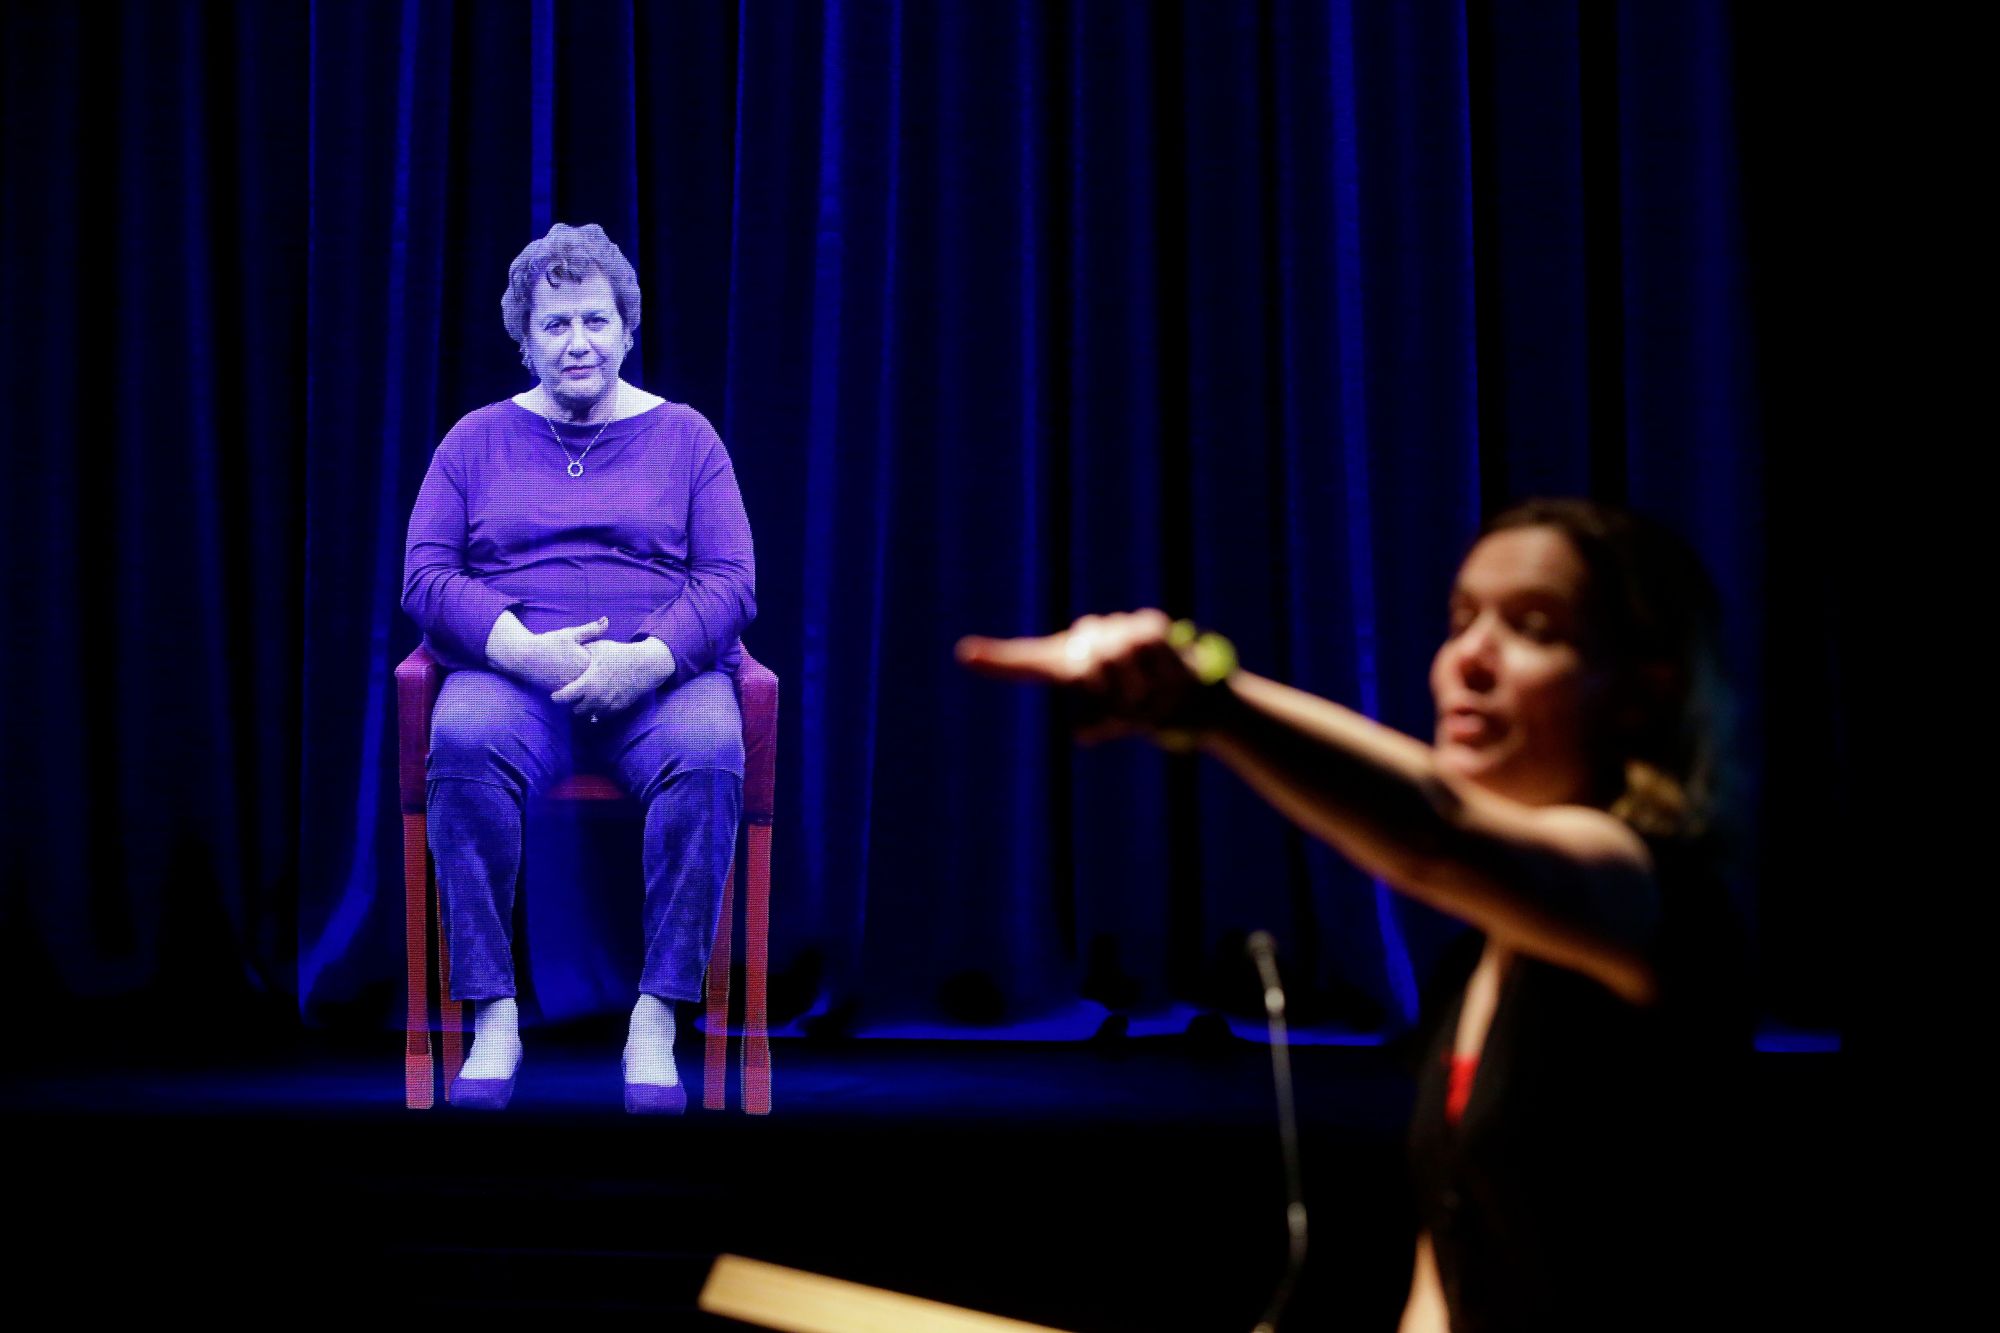 Interactive holograms of Holocaust survivors debut at Illinois museum | The Japan Times